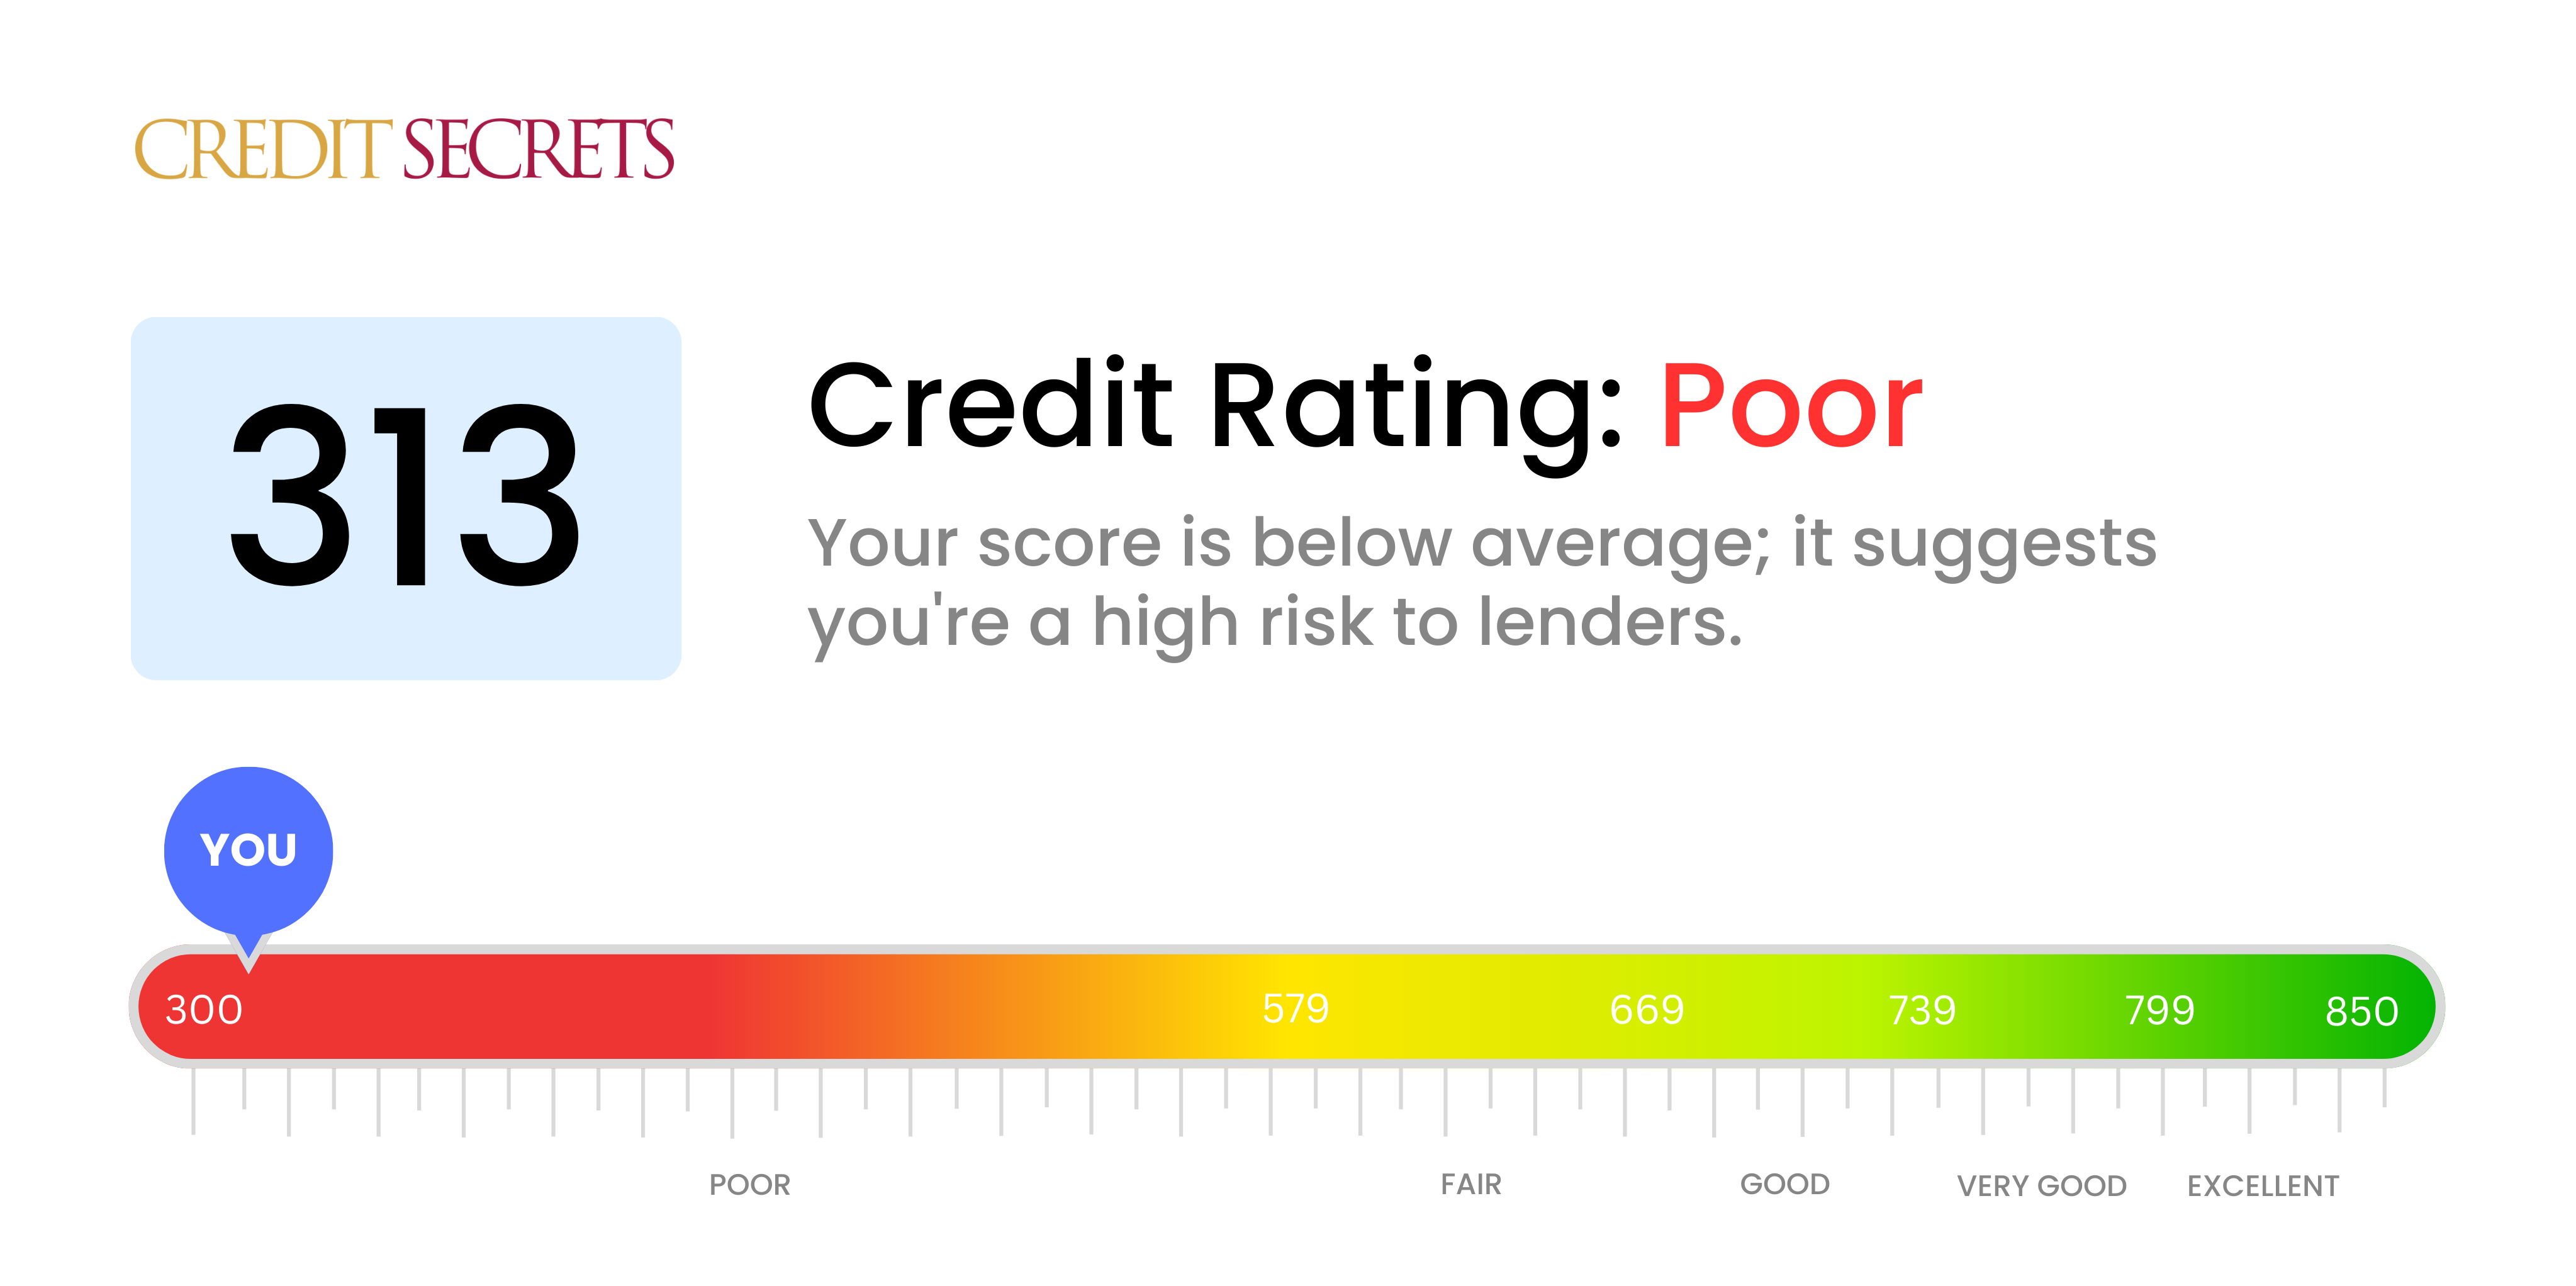 Is 313 a good credit score?